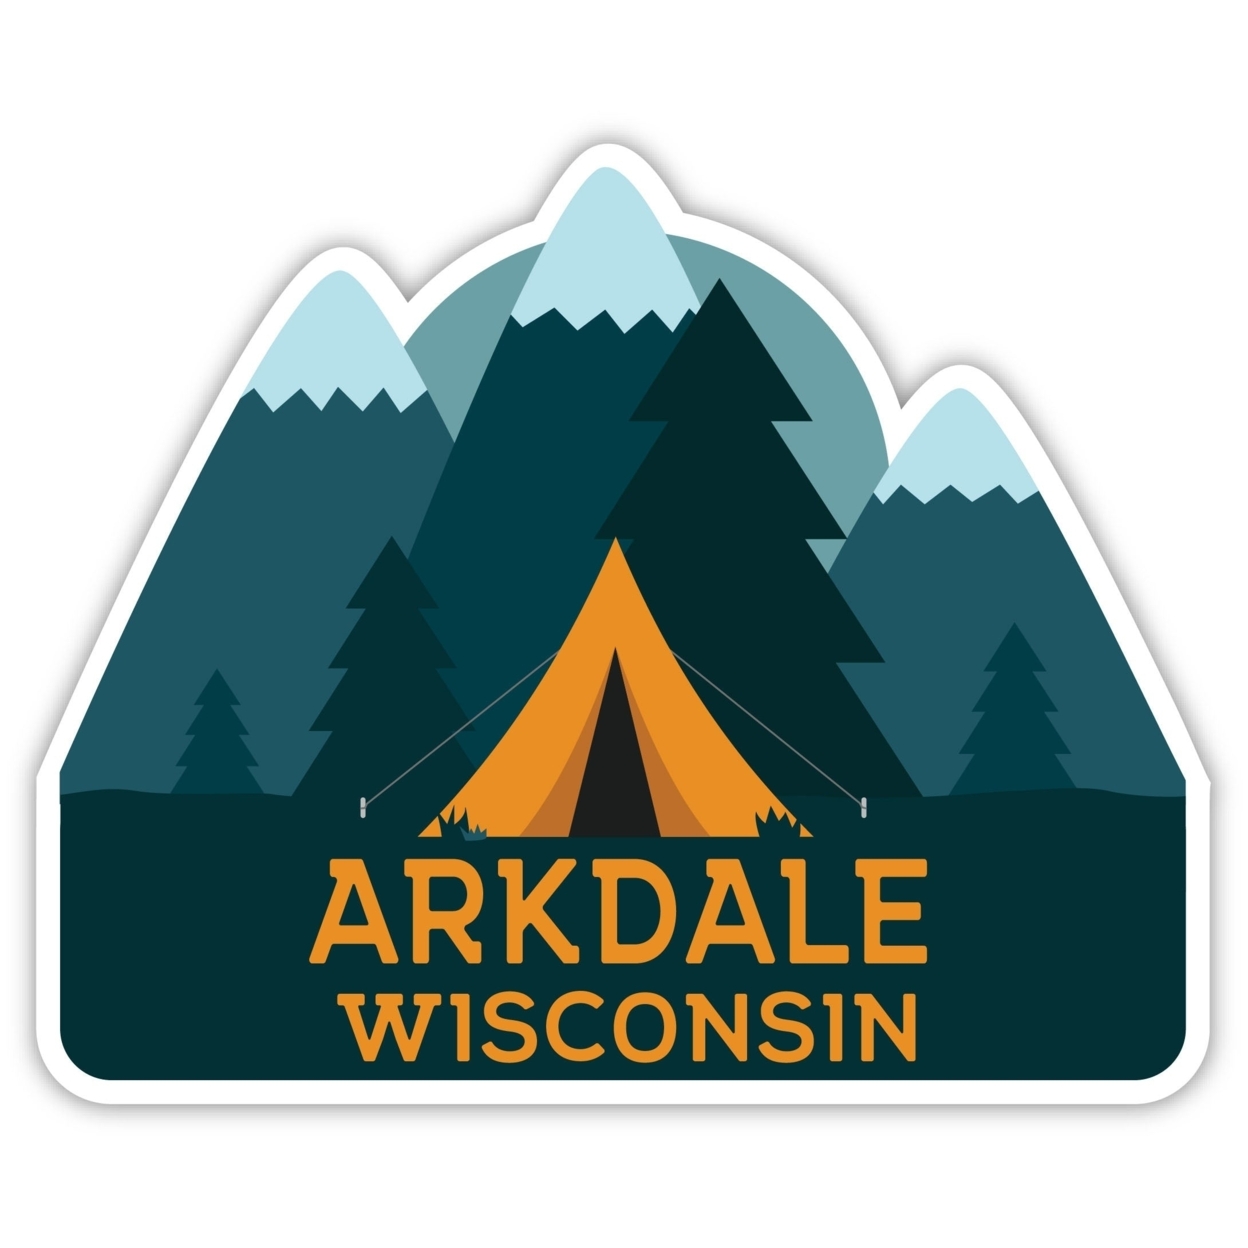 Arkdale Wisconsin Souvenir Decorative Stickers (Choose Theme And Size) - Single Unit, 2-Inch, Tent